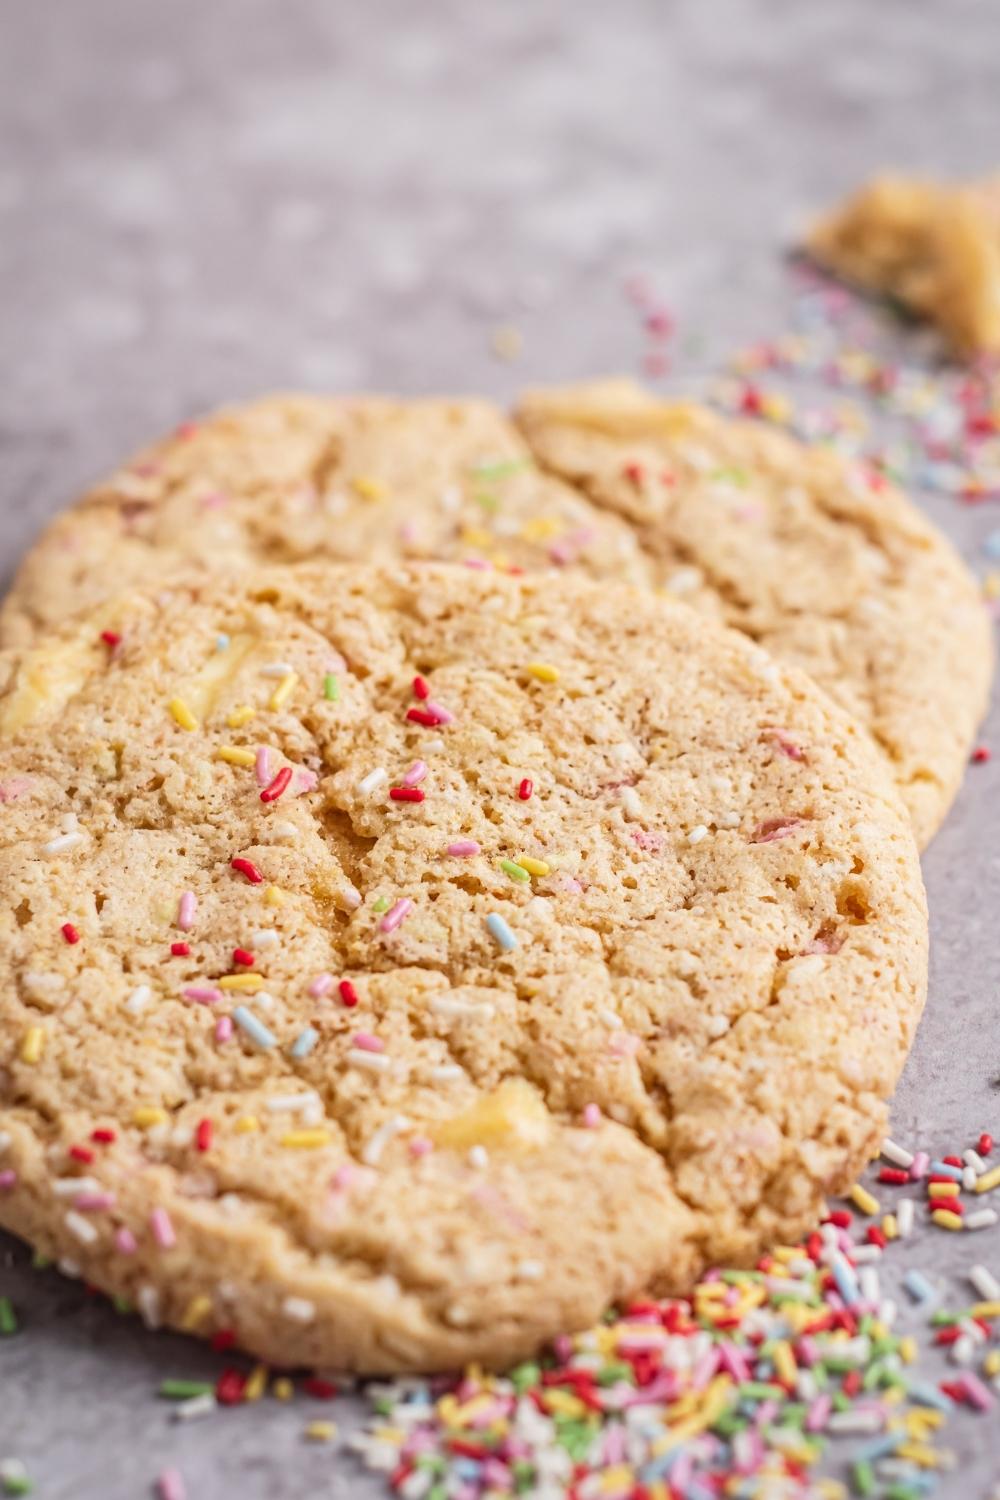 Two funfetti cookies on a parchment paper sheet. Rainbow sprinkles are on top of the cookies and next t them.